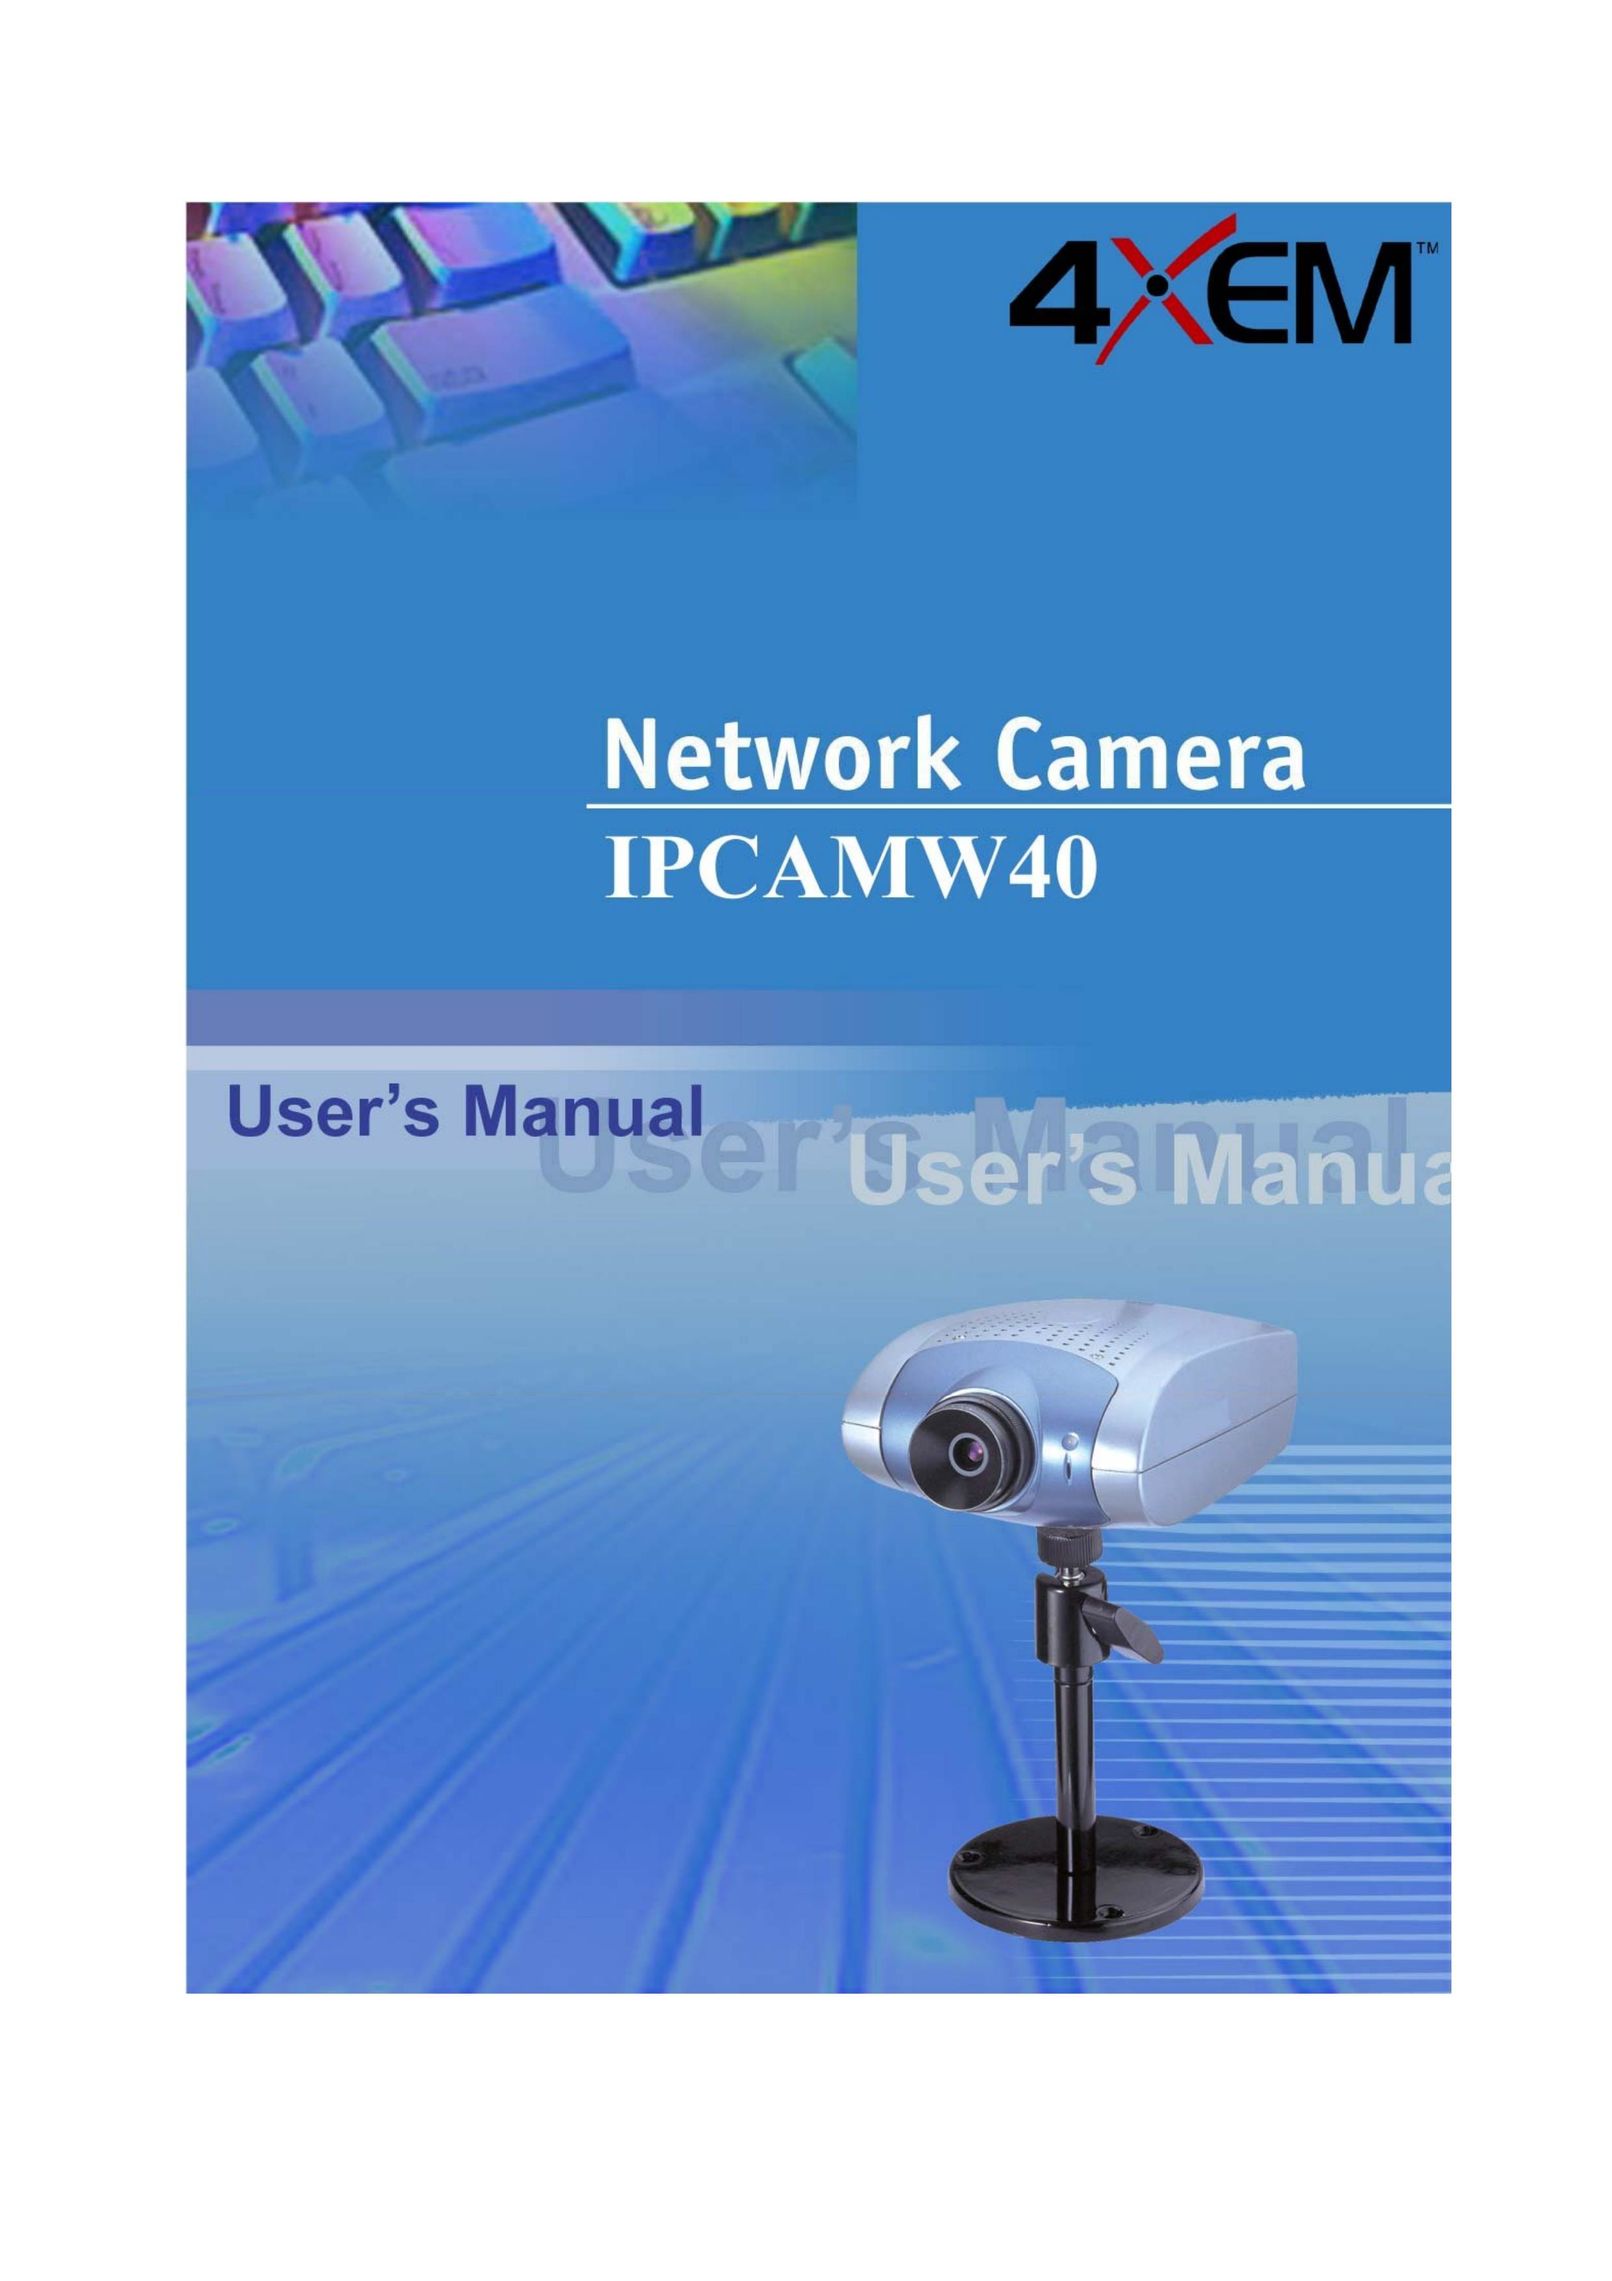 4XEM IPCAMW40 Home Security System User Manual